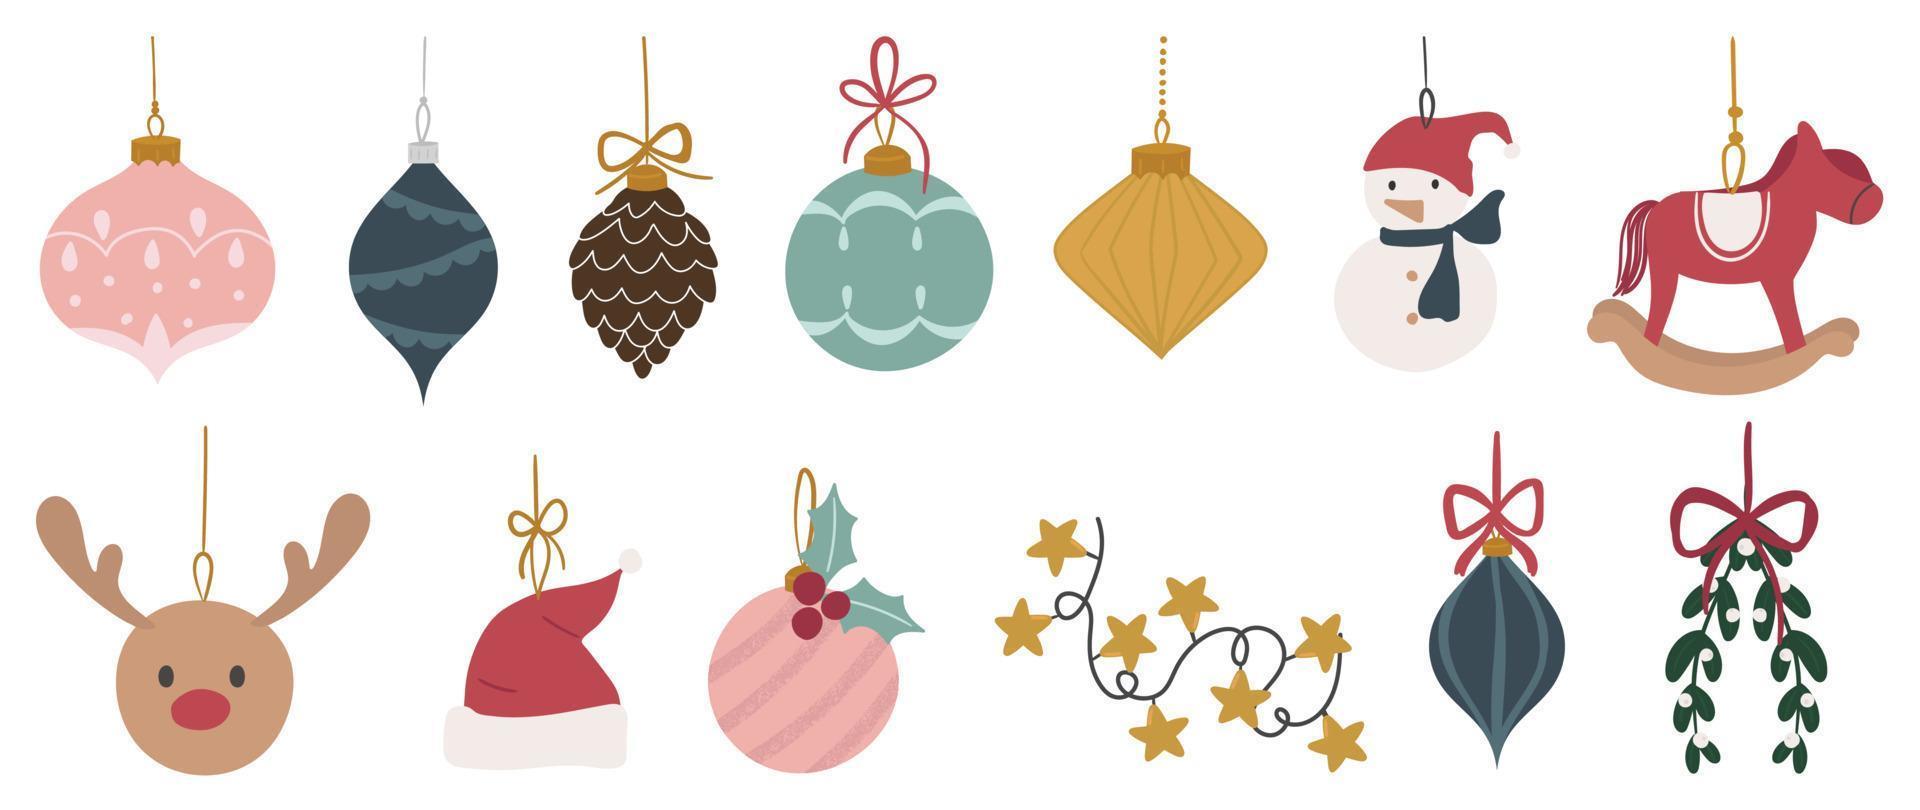 Set of decorative christmas hanging bauble vector illustration. Collection of christmas balls, santa hat, pine cone, star light wire, reindeer. Design for sticker, card, print, poster, decoration.